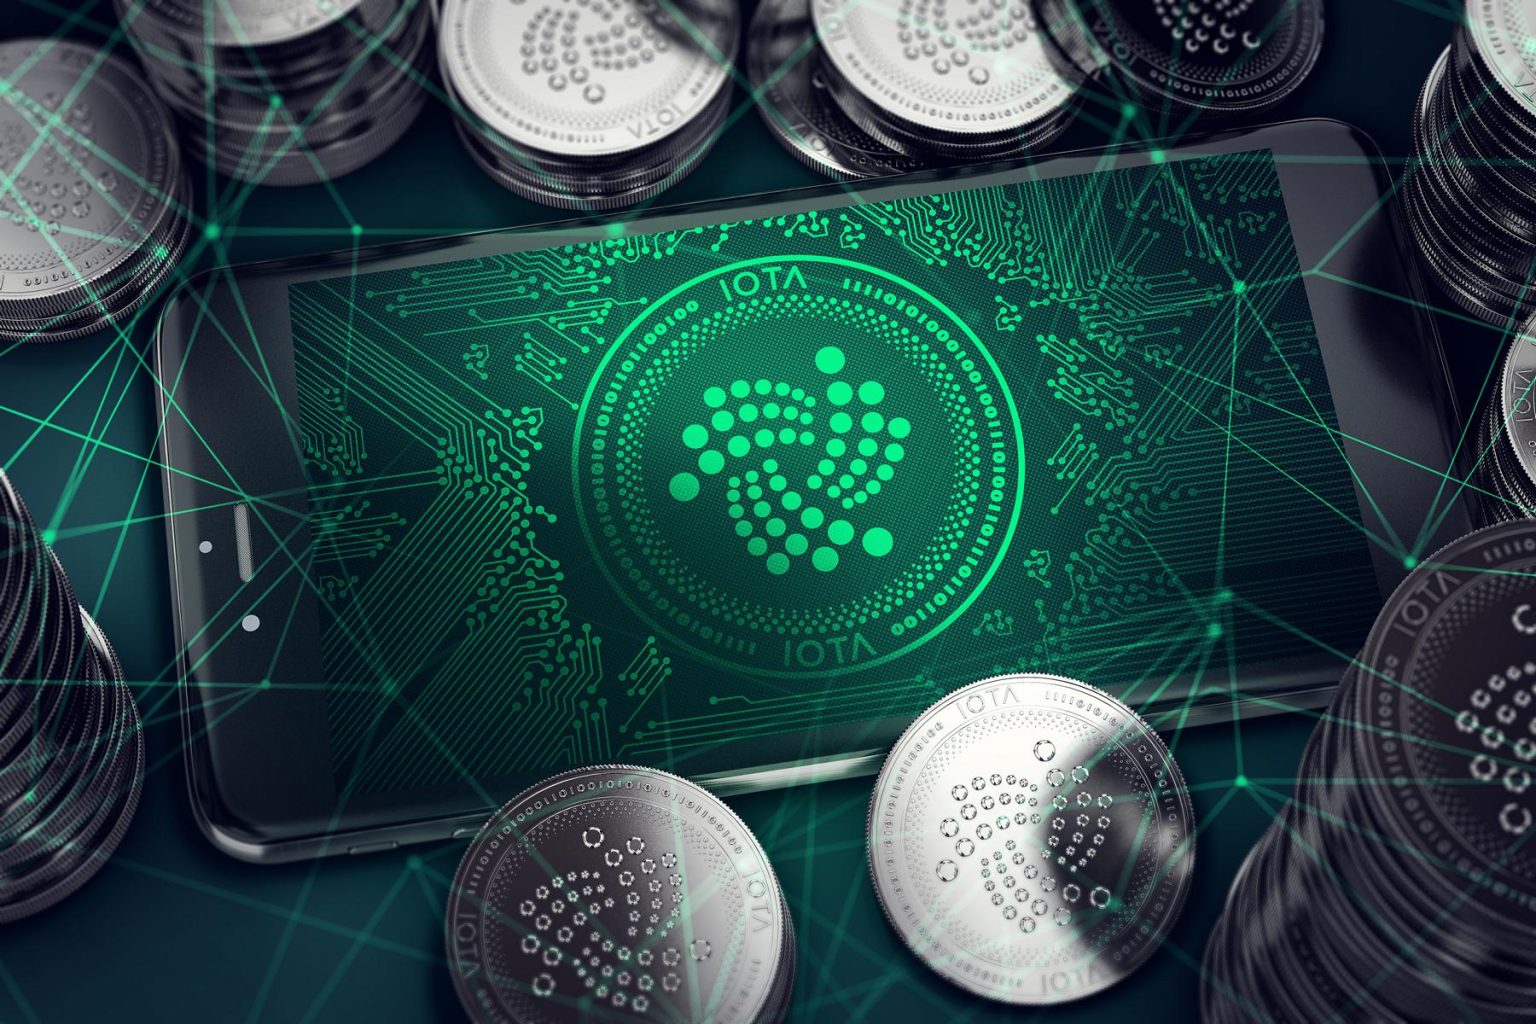 Ripple-XRp-logo-on-mobile-phone-in-green-color.